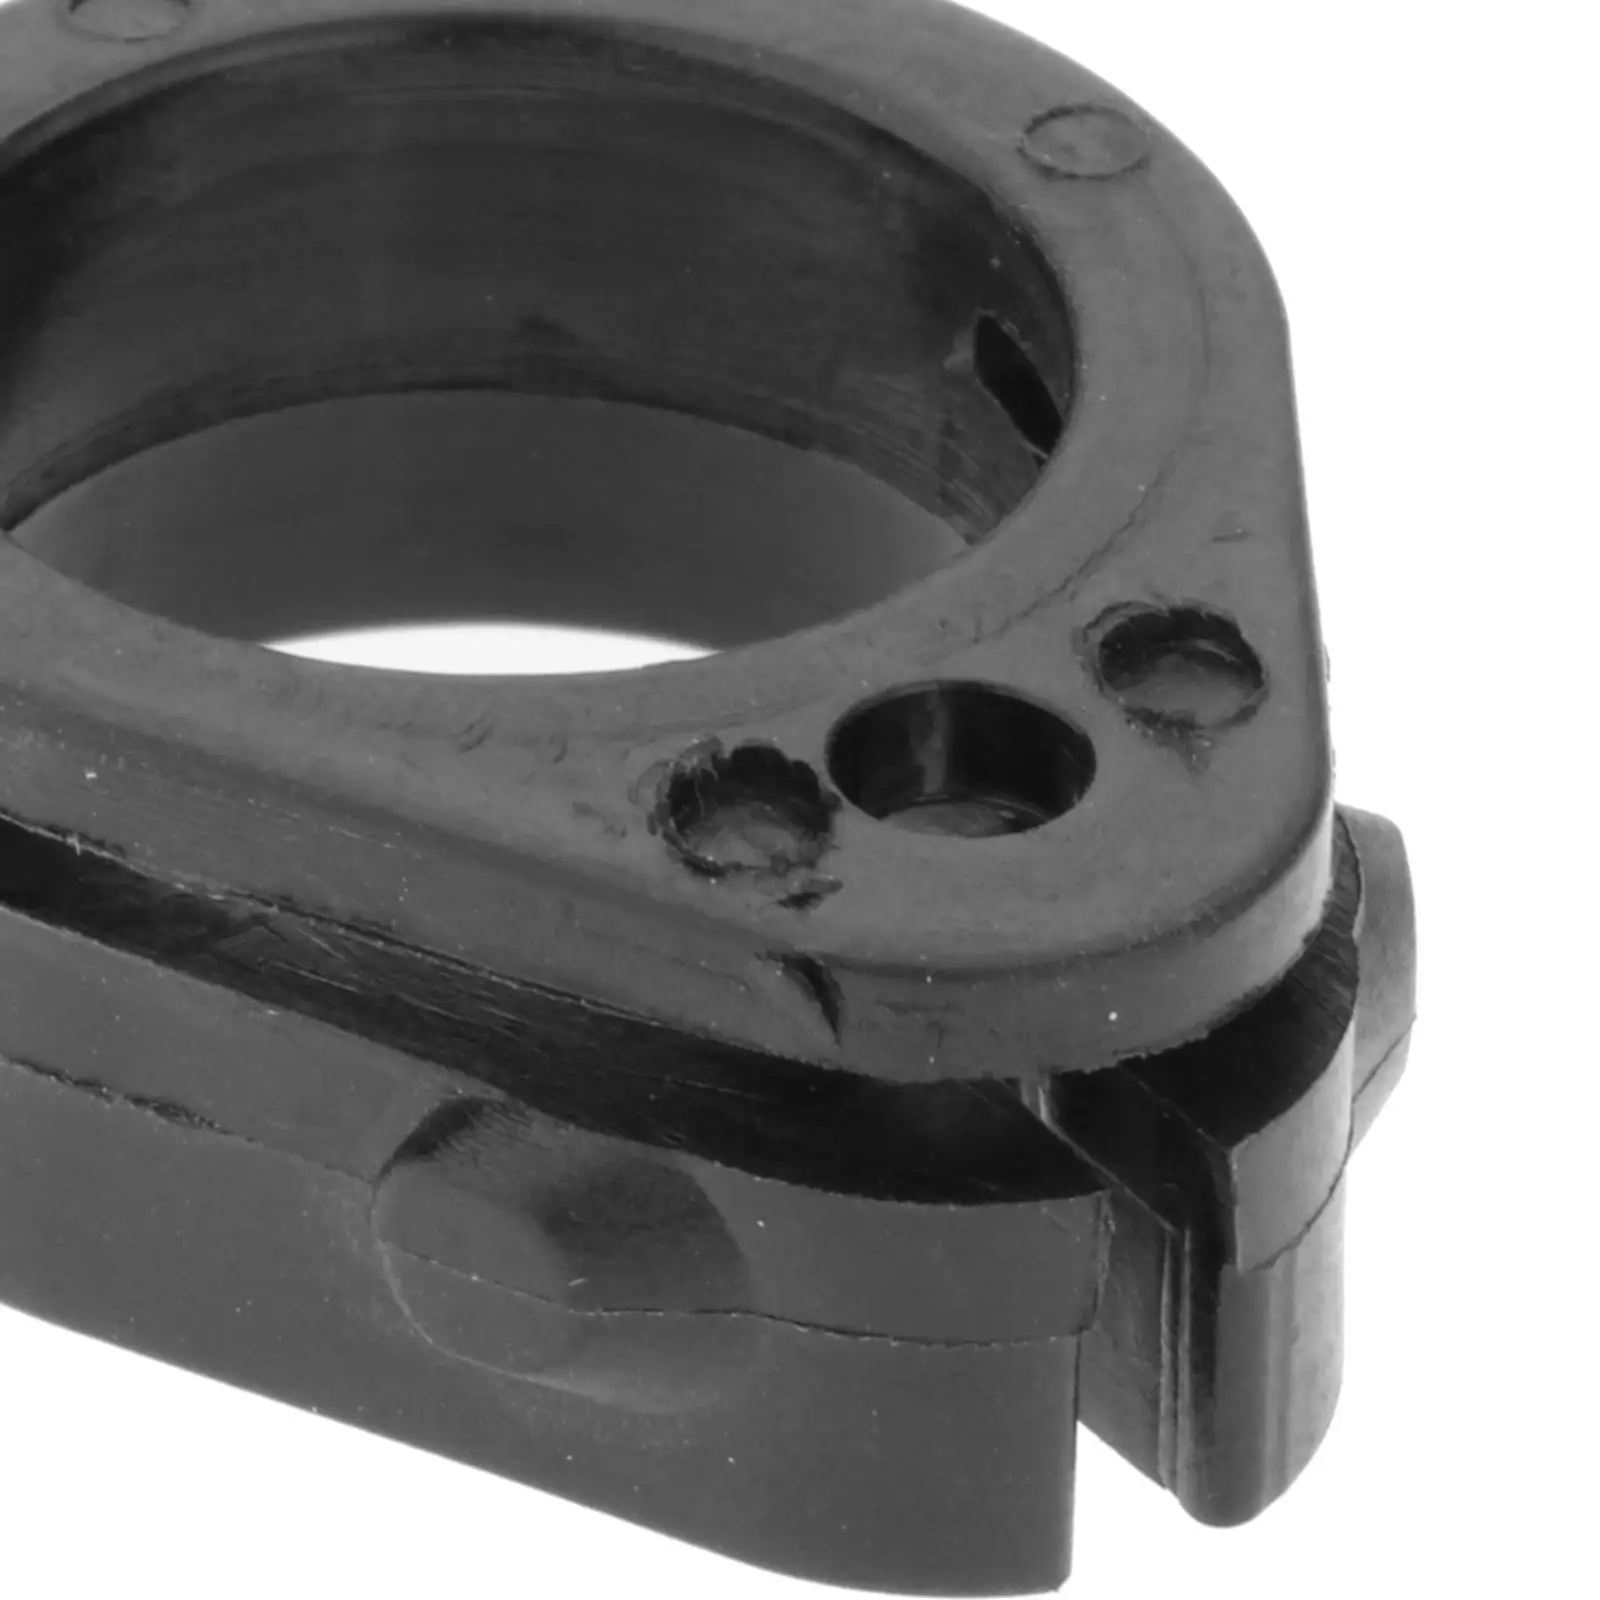 Gearshift Boot Bracket 682-441 for Outboard 9.15HP Mariner 9.9C 15C ,Durable Direct Replaces, High Performance